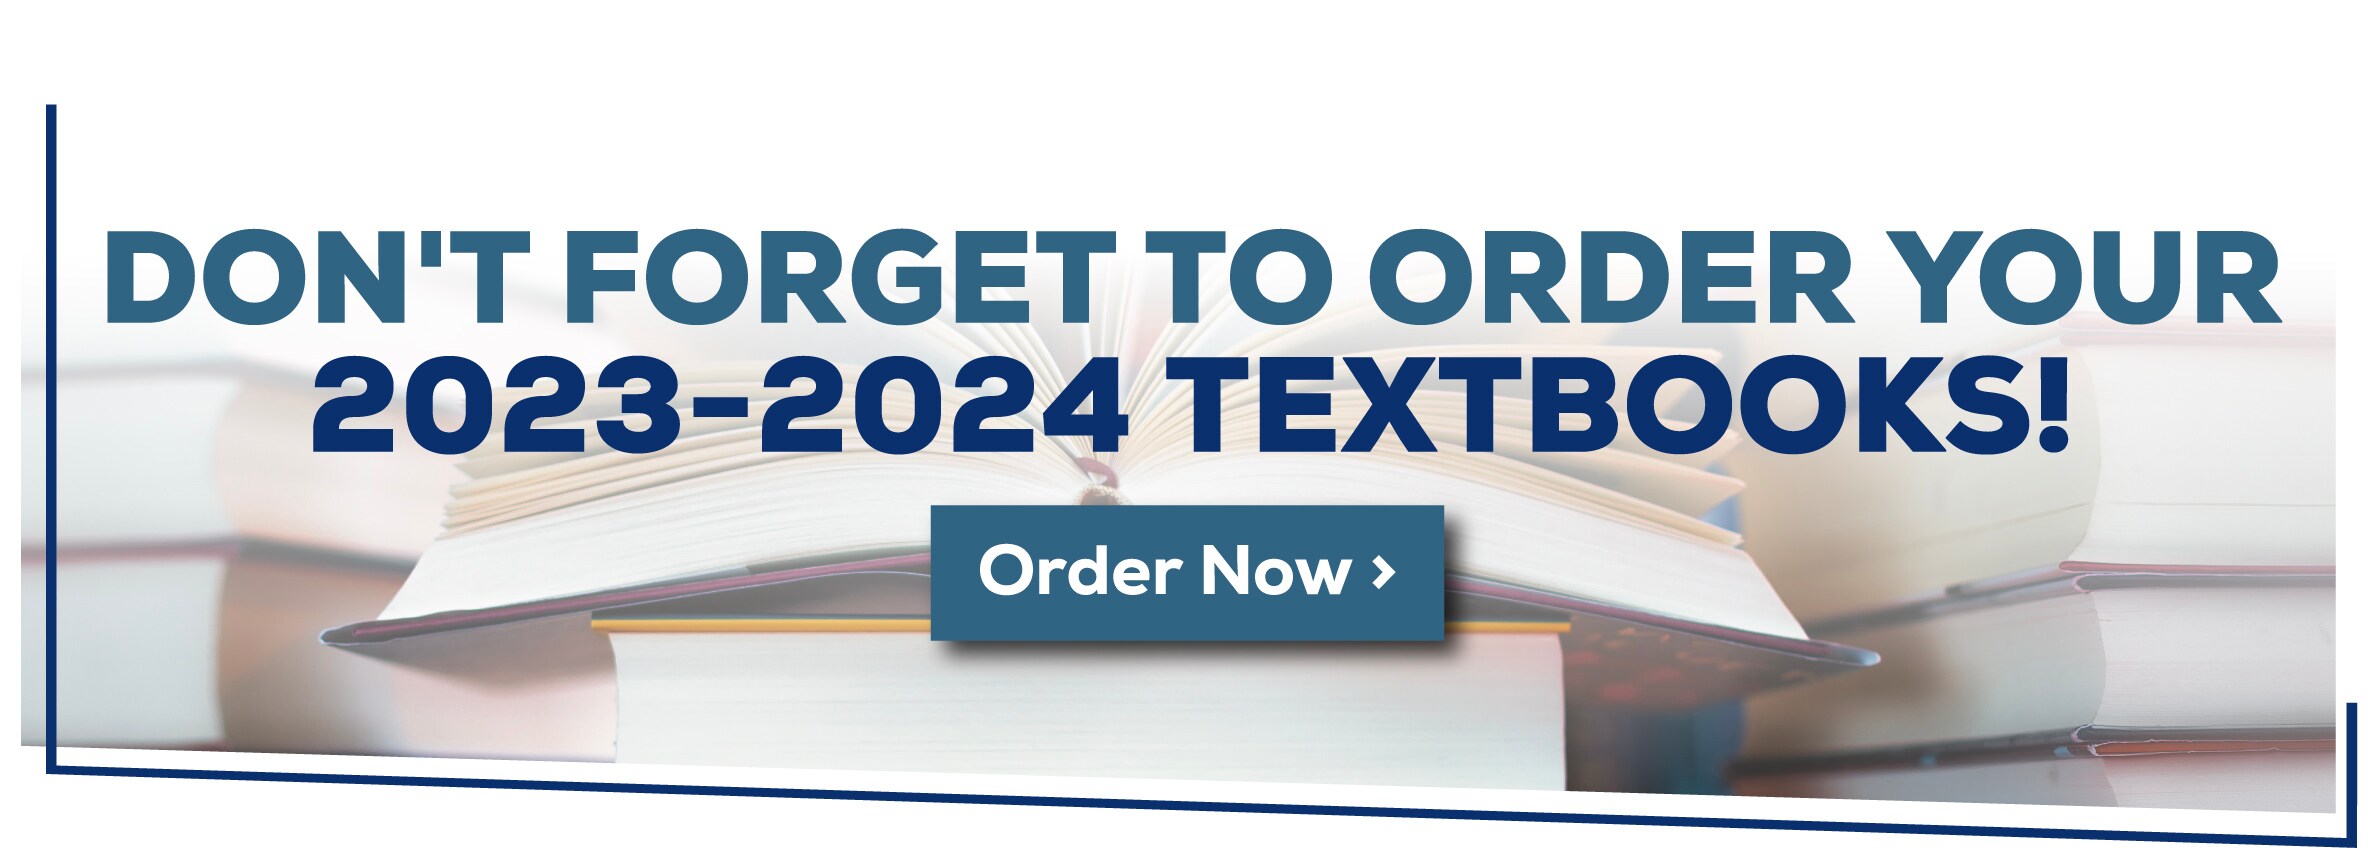 Don't forget to order your 2023-2024 textbooks! Order Now!